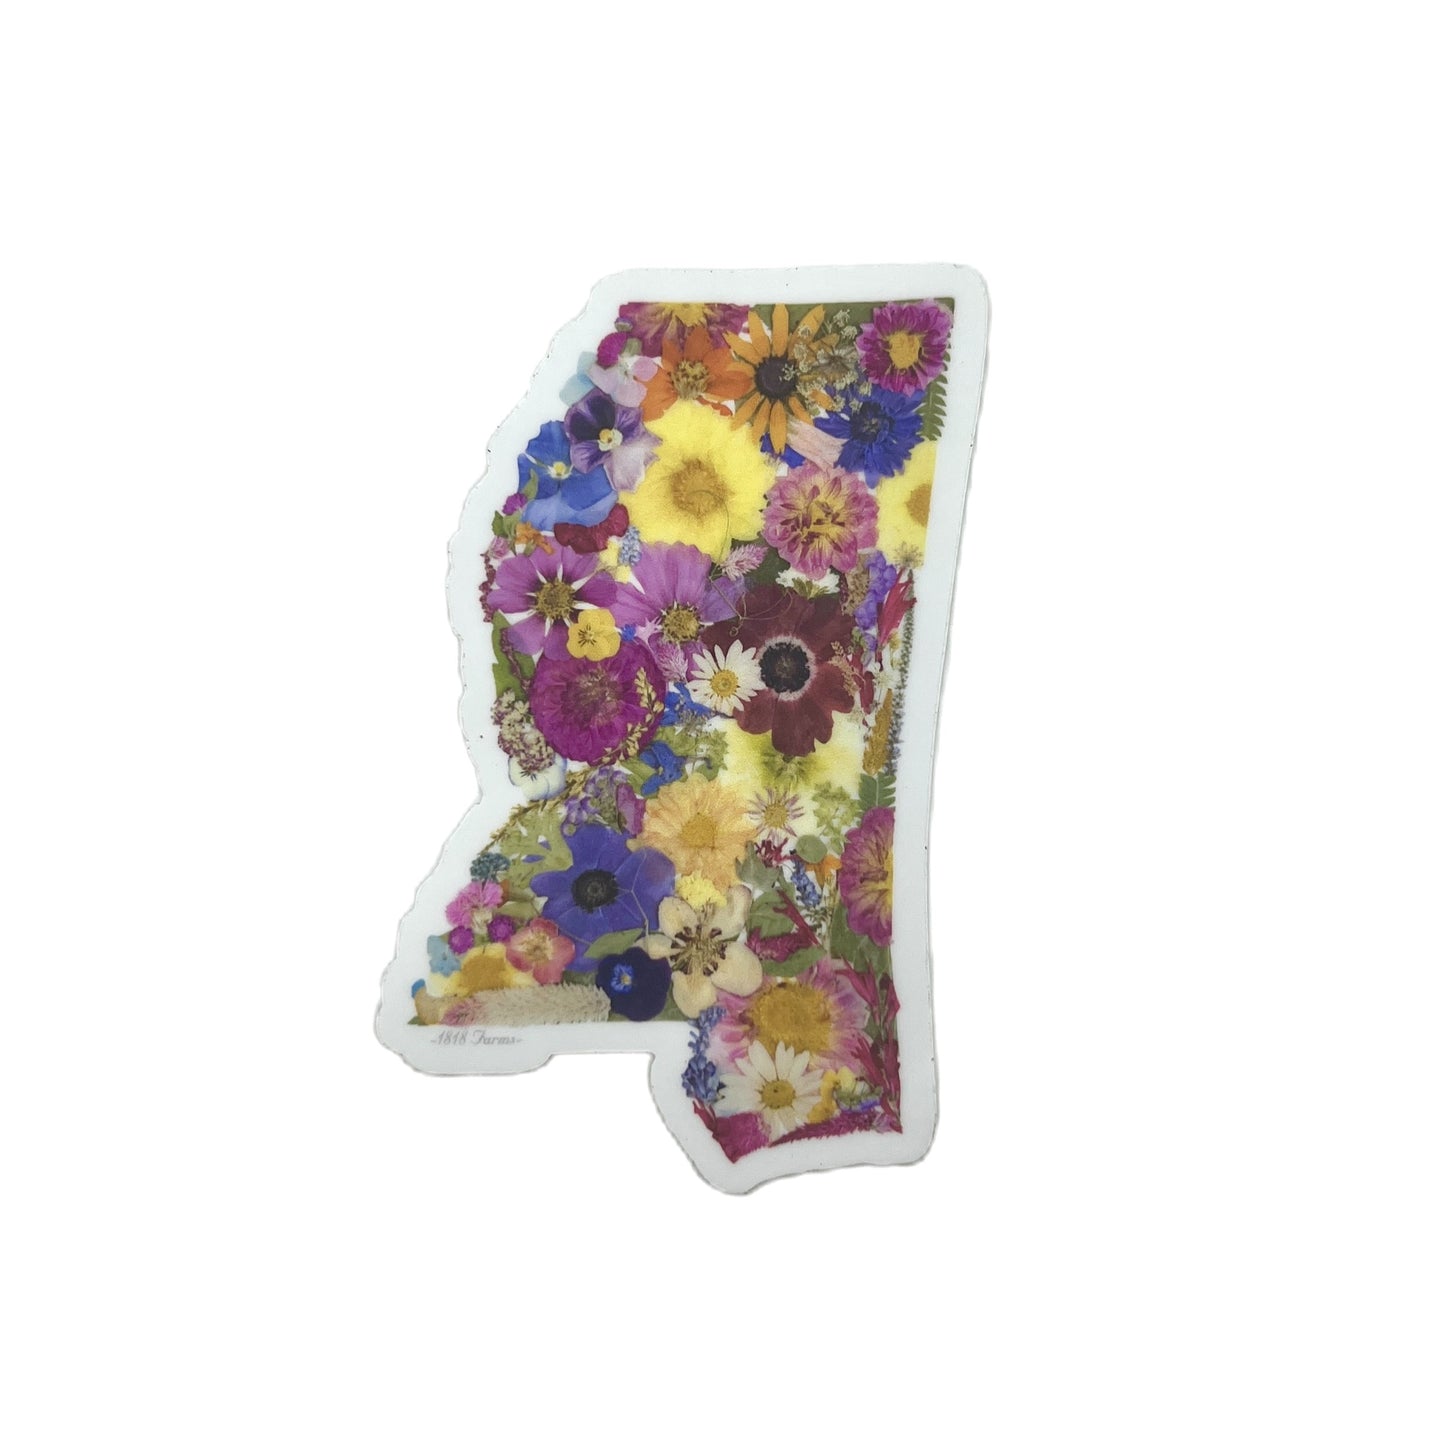 State Themed Vinyl Sticker Featuring Dried, Pressed Flowers - "Where I Bloom" Collection Vinyl Sticker 1818 Farms Mississippi  